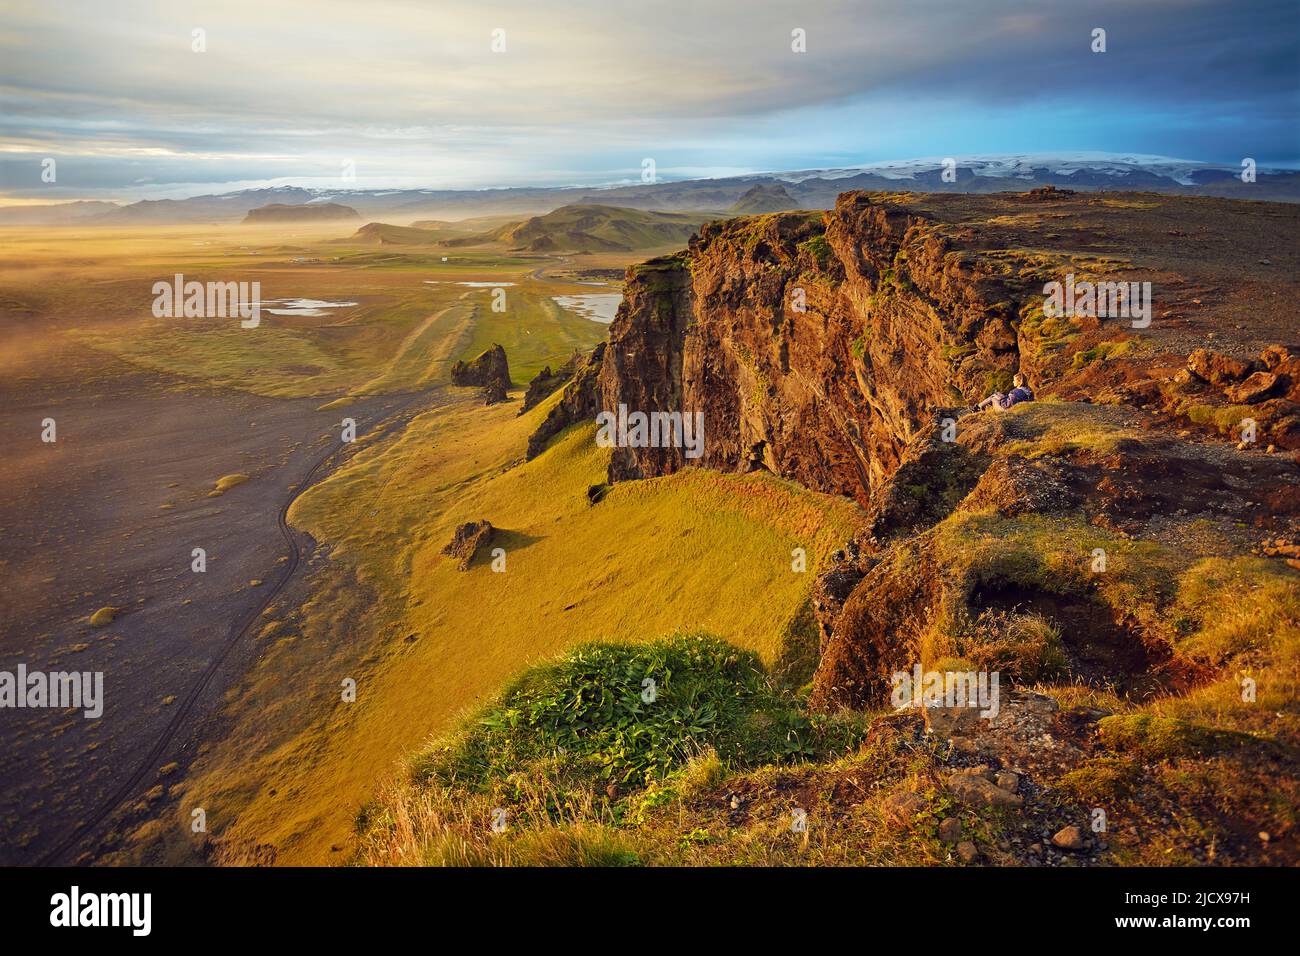 Cliff and mountain view from Dyrholaey Island, just before sunset, near Vik, south coast of Iceland, Polar Regions Stock Photo